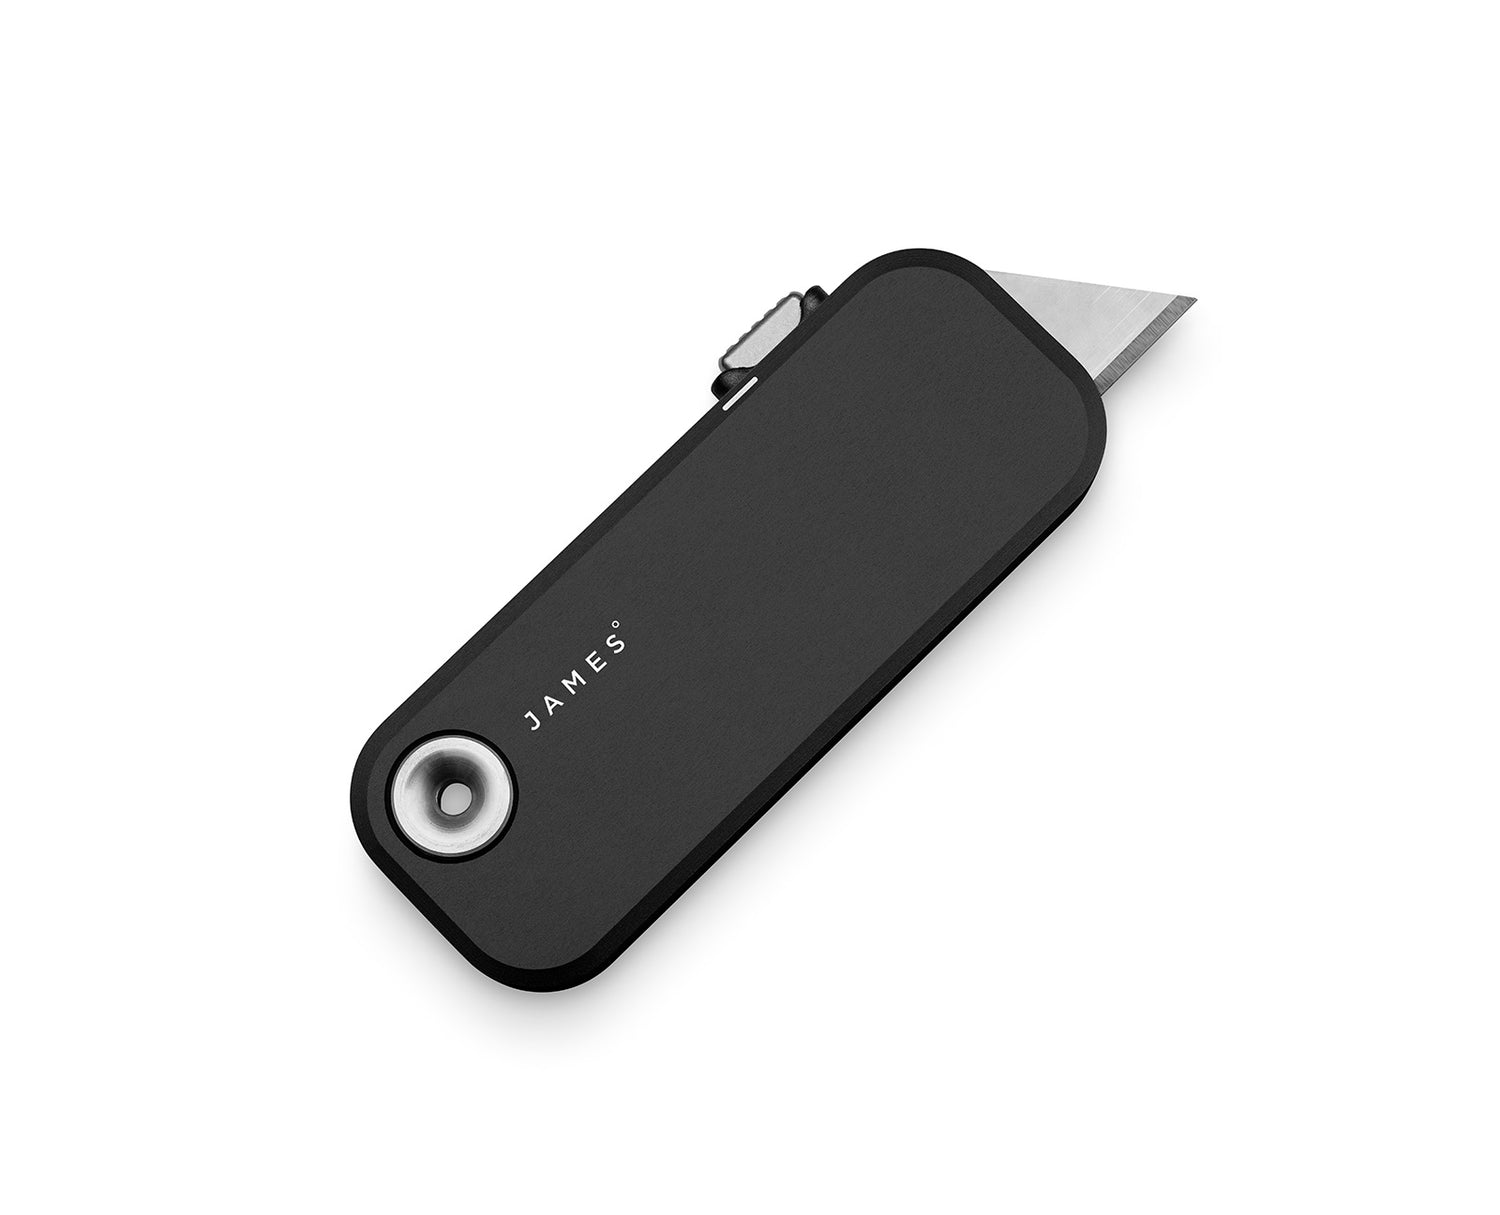 The Palmer knife with black colored case.